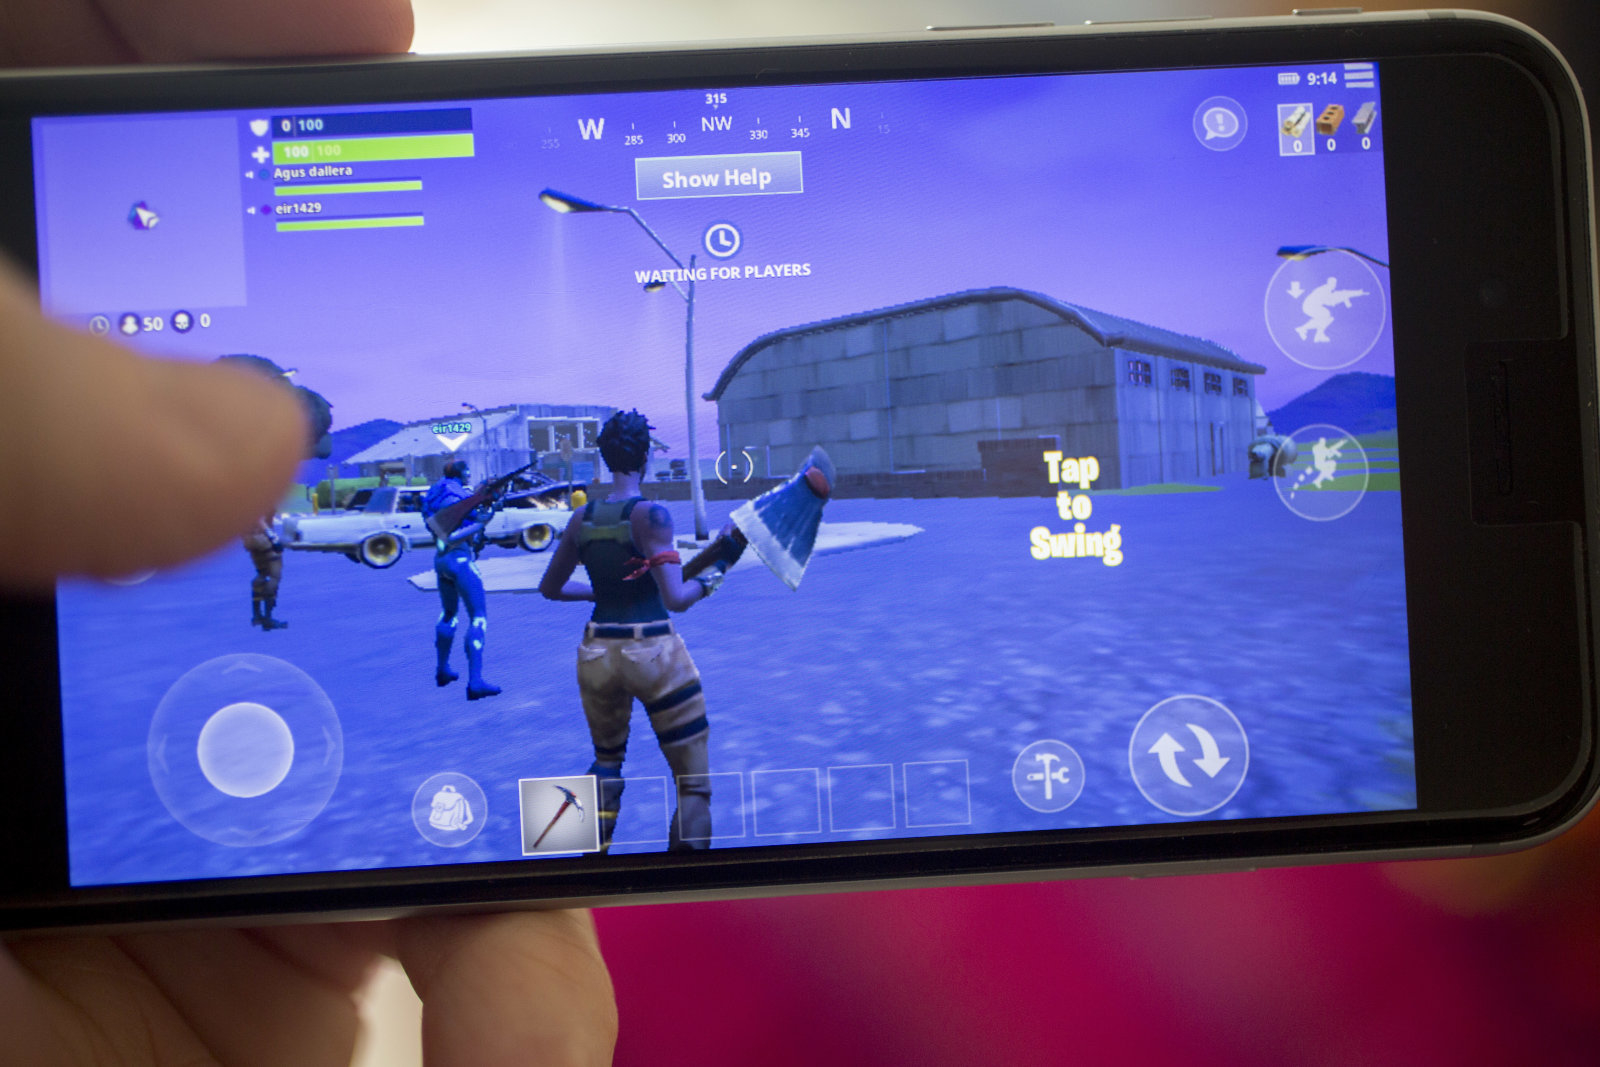 The Epic Games Inc. Fortnite: Battle Royale video game is displayed for a photograph on an Apple Inc. iPhone in Washington, D.C., U.S., on Thursday, May 10, 2018. Fortnite, the hitÂ gameÂ that's denting the stock prices of video-gameÂ makers after signing up 45 million players, didn't really take off until it became free and a free-for-all. Photographer: Andrew Harrer/Bloomberg via Getty Images